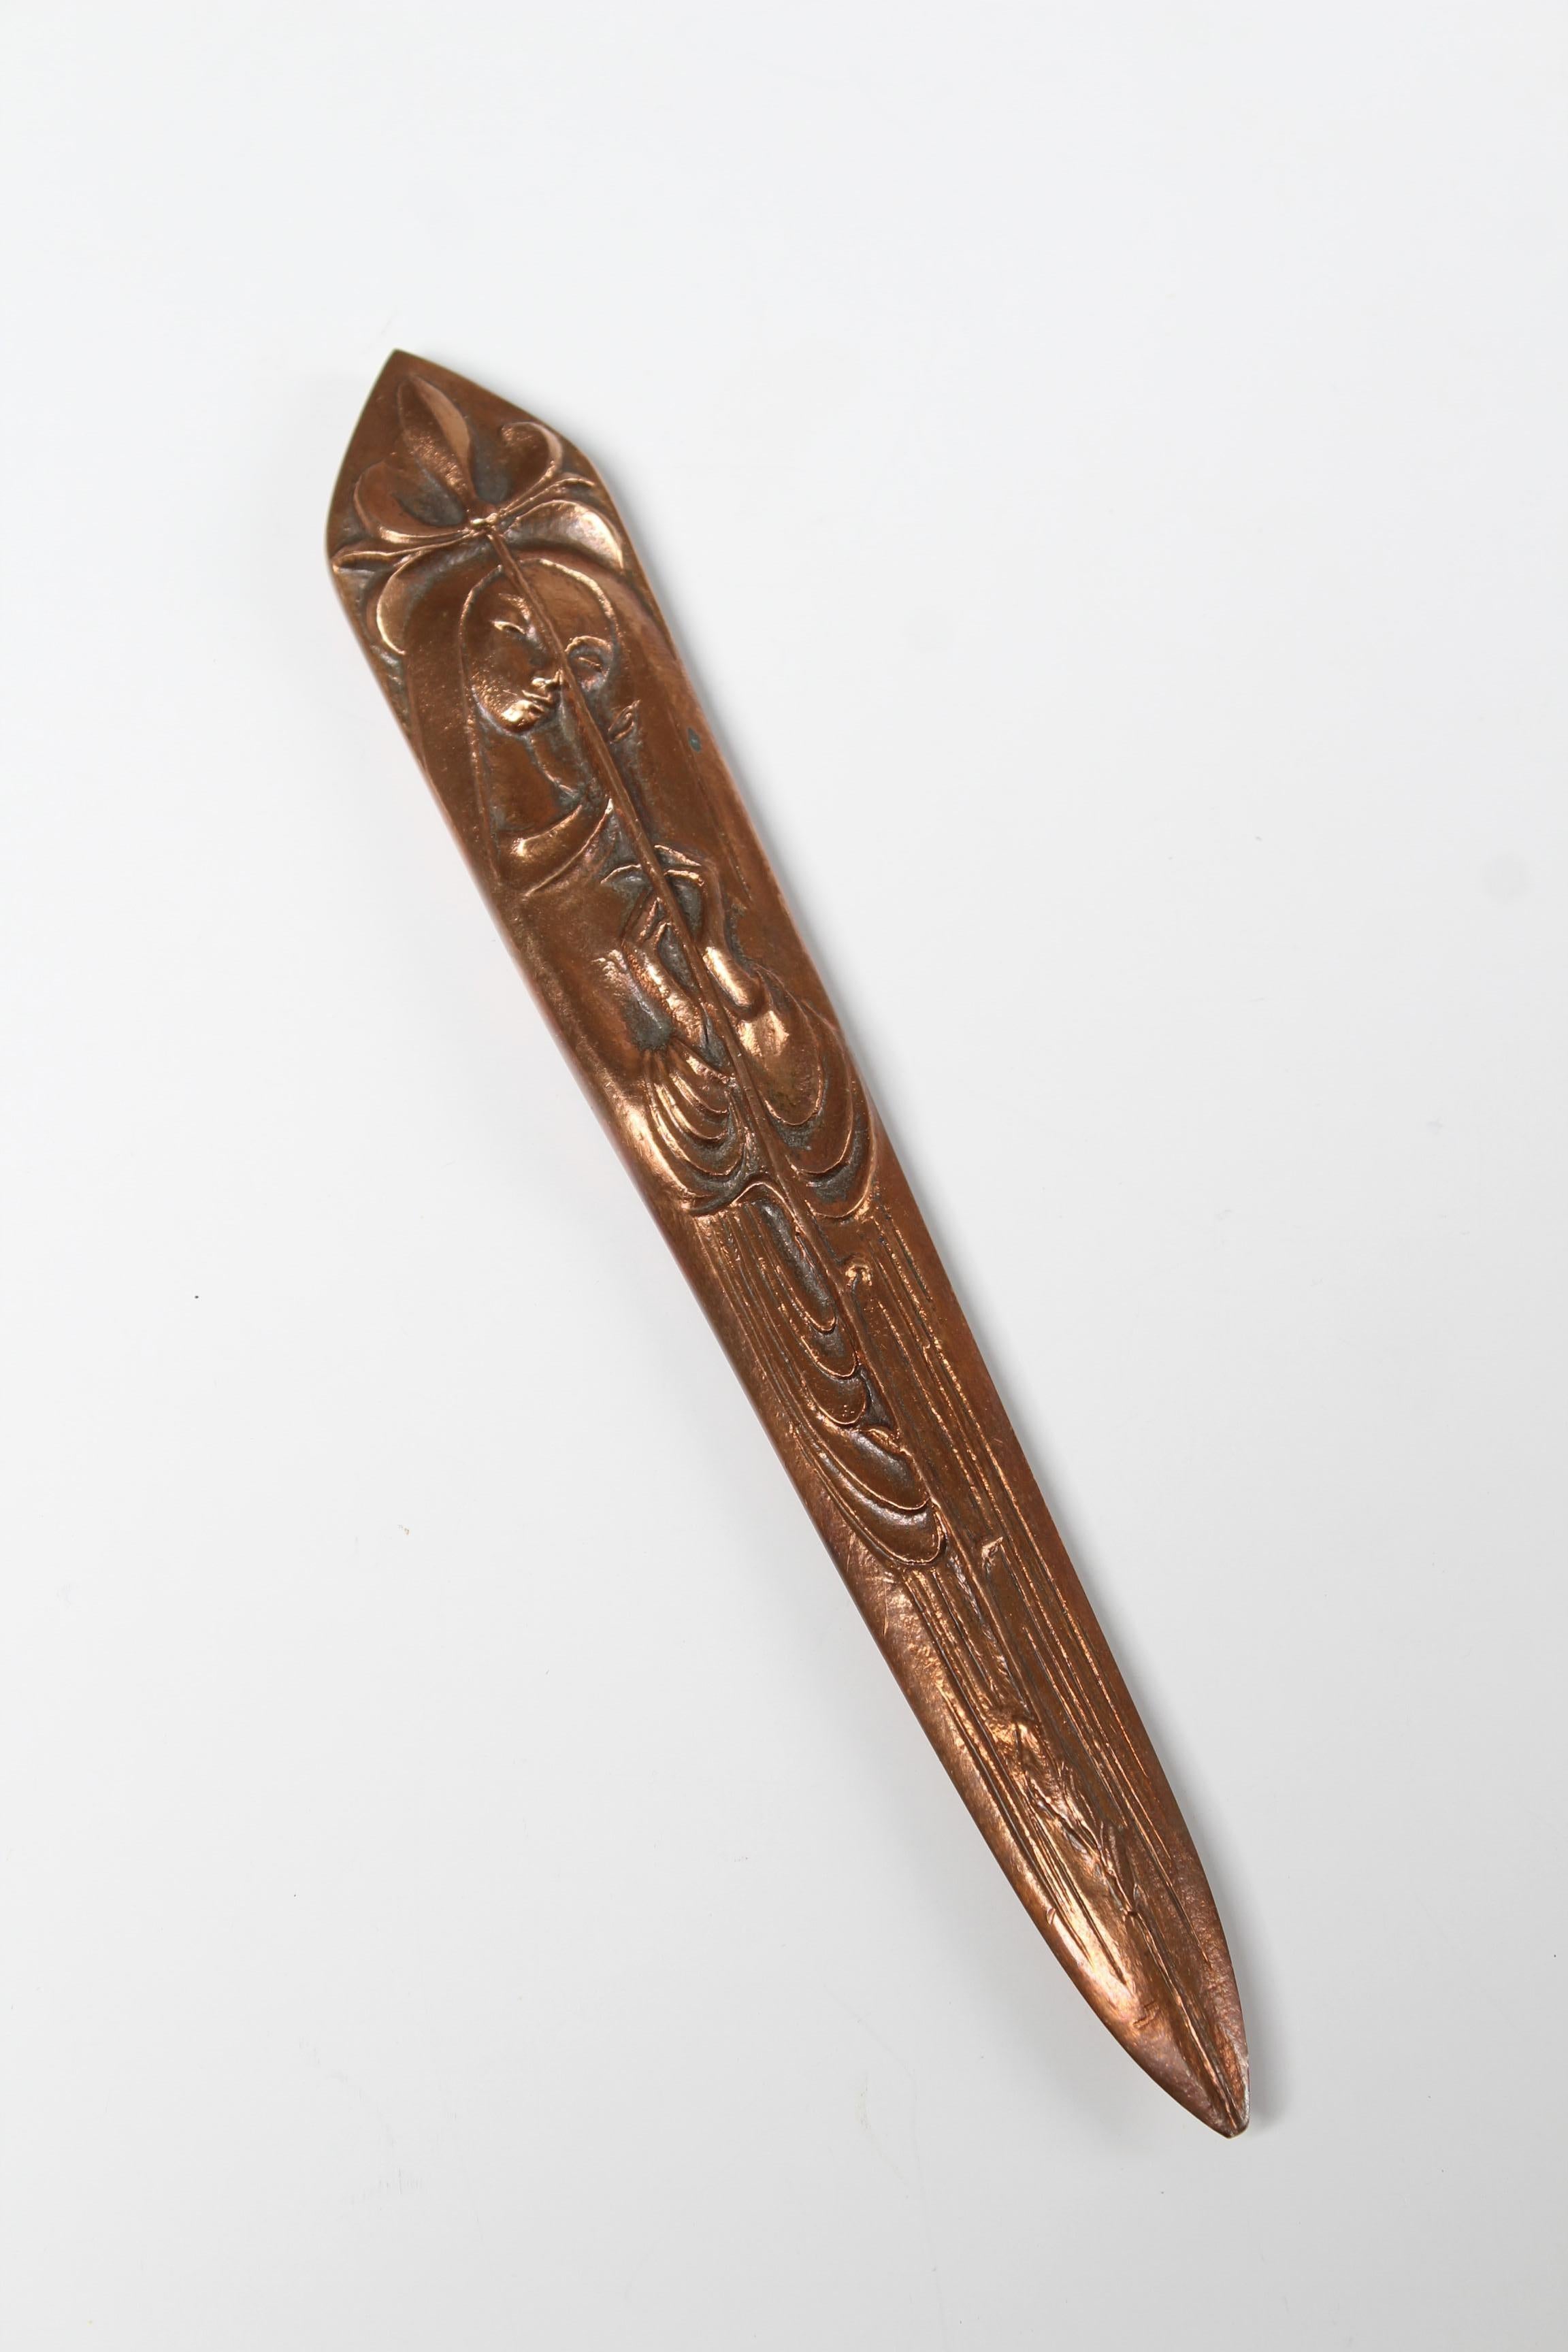 Antique Letter Opener with Madonna.

So beautiful, very nice condition!